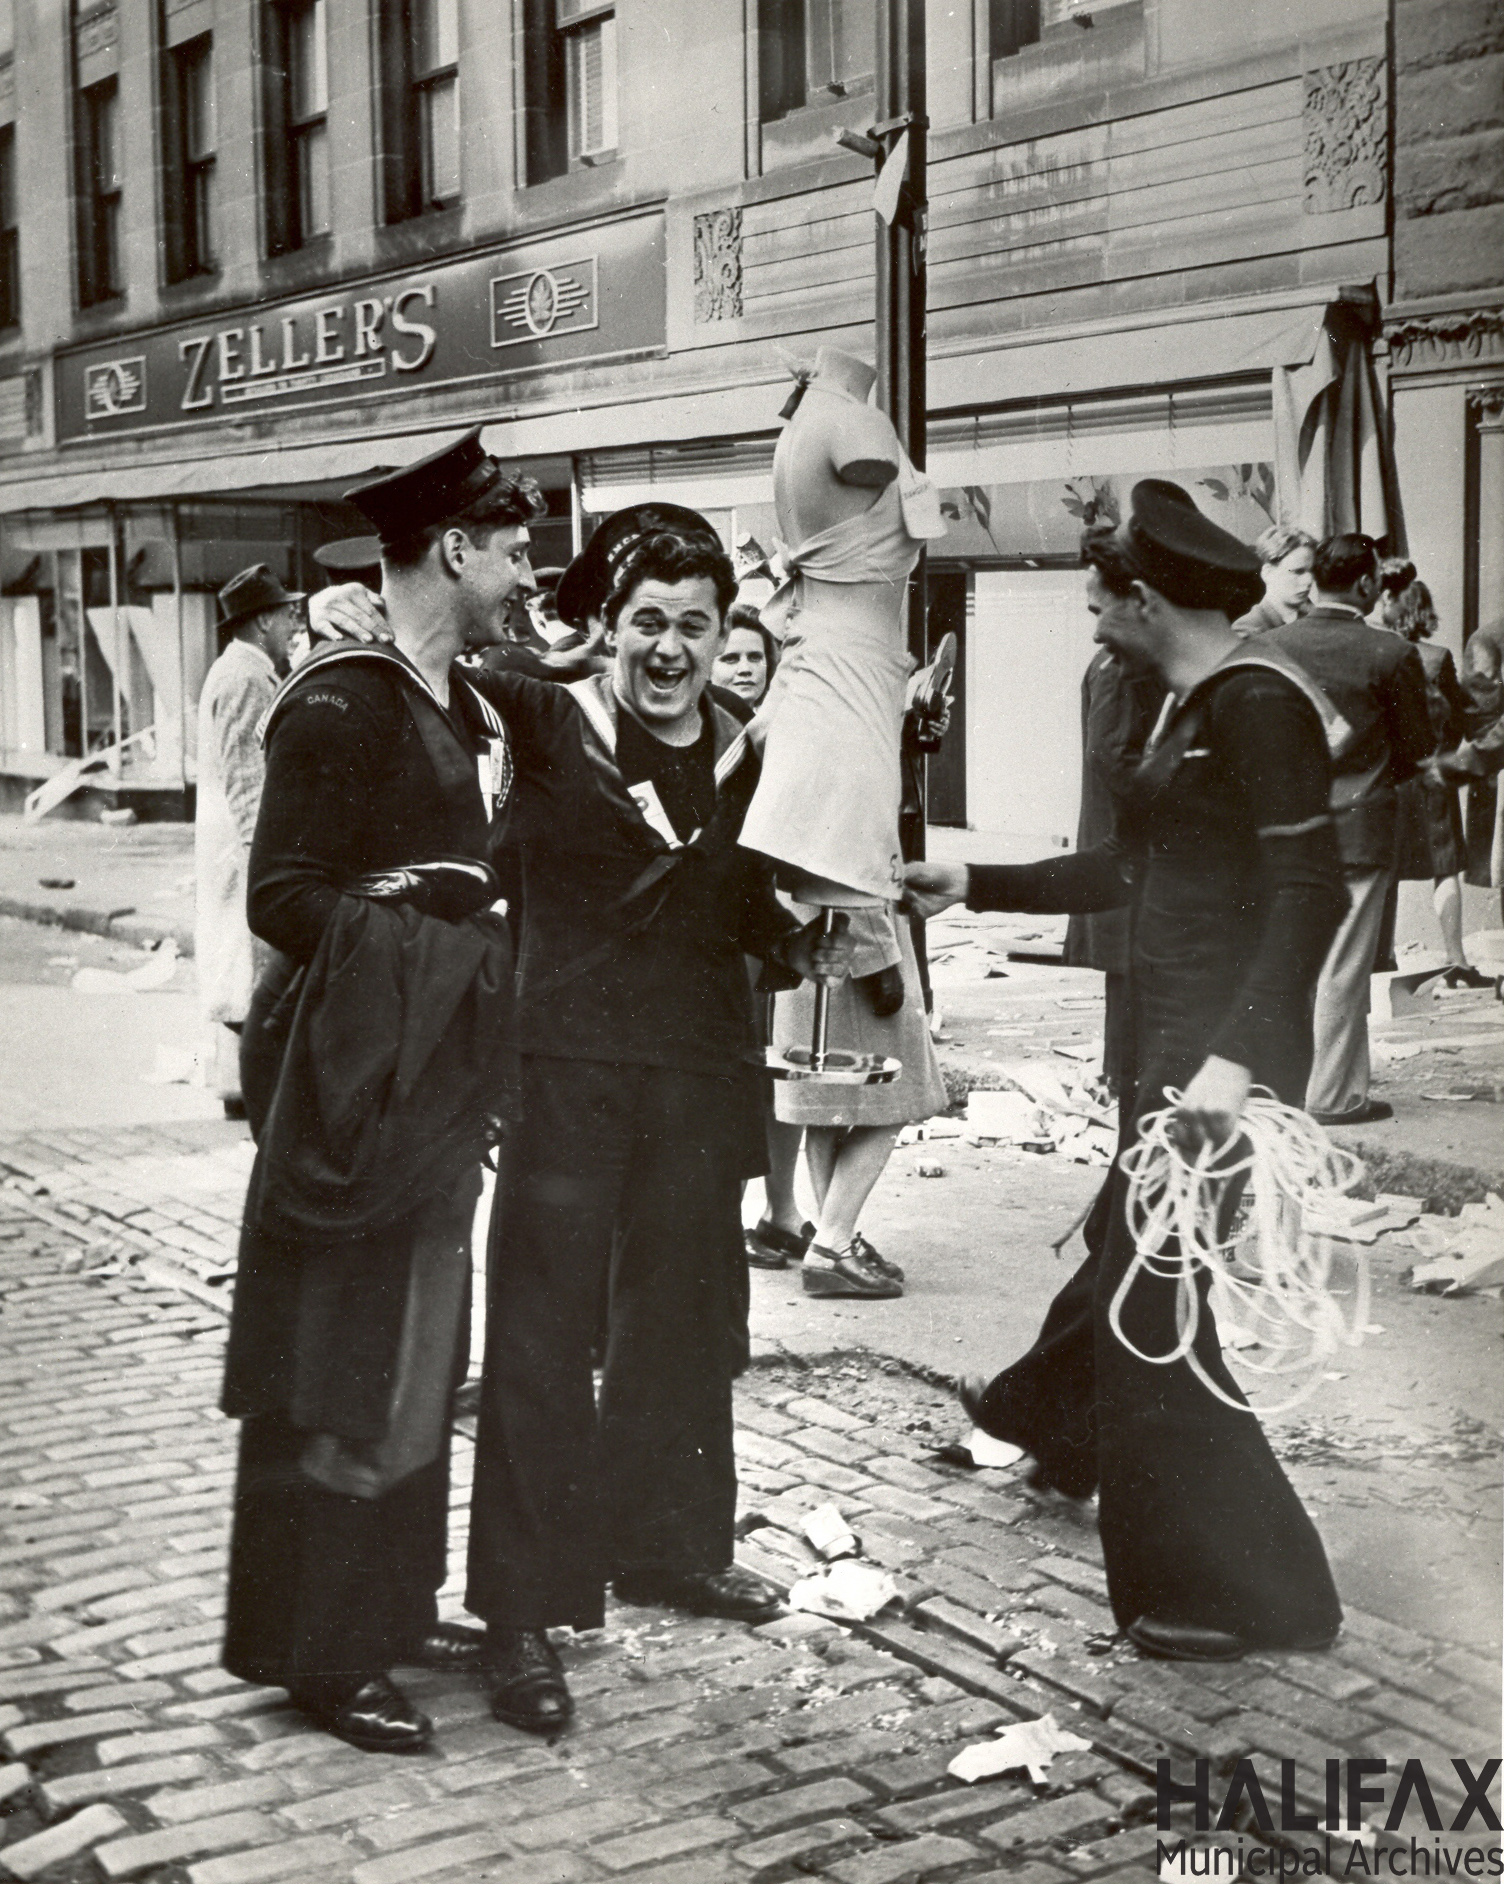 Black and white photograph of celebrating sailors holding a mannequin outside a Zeller's store